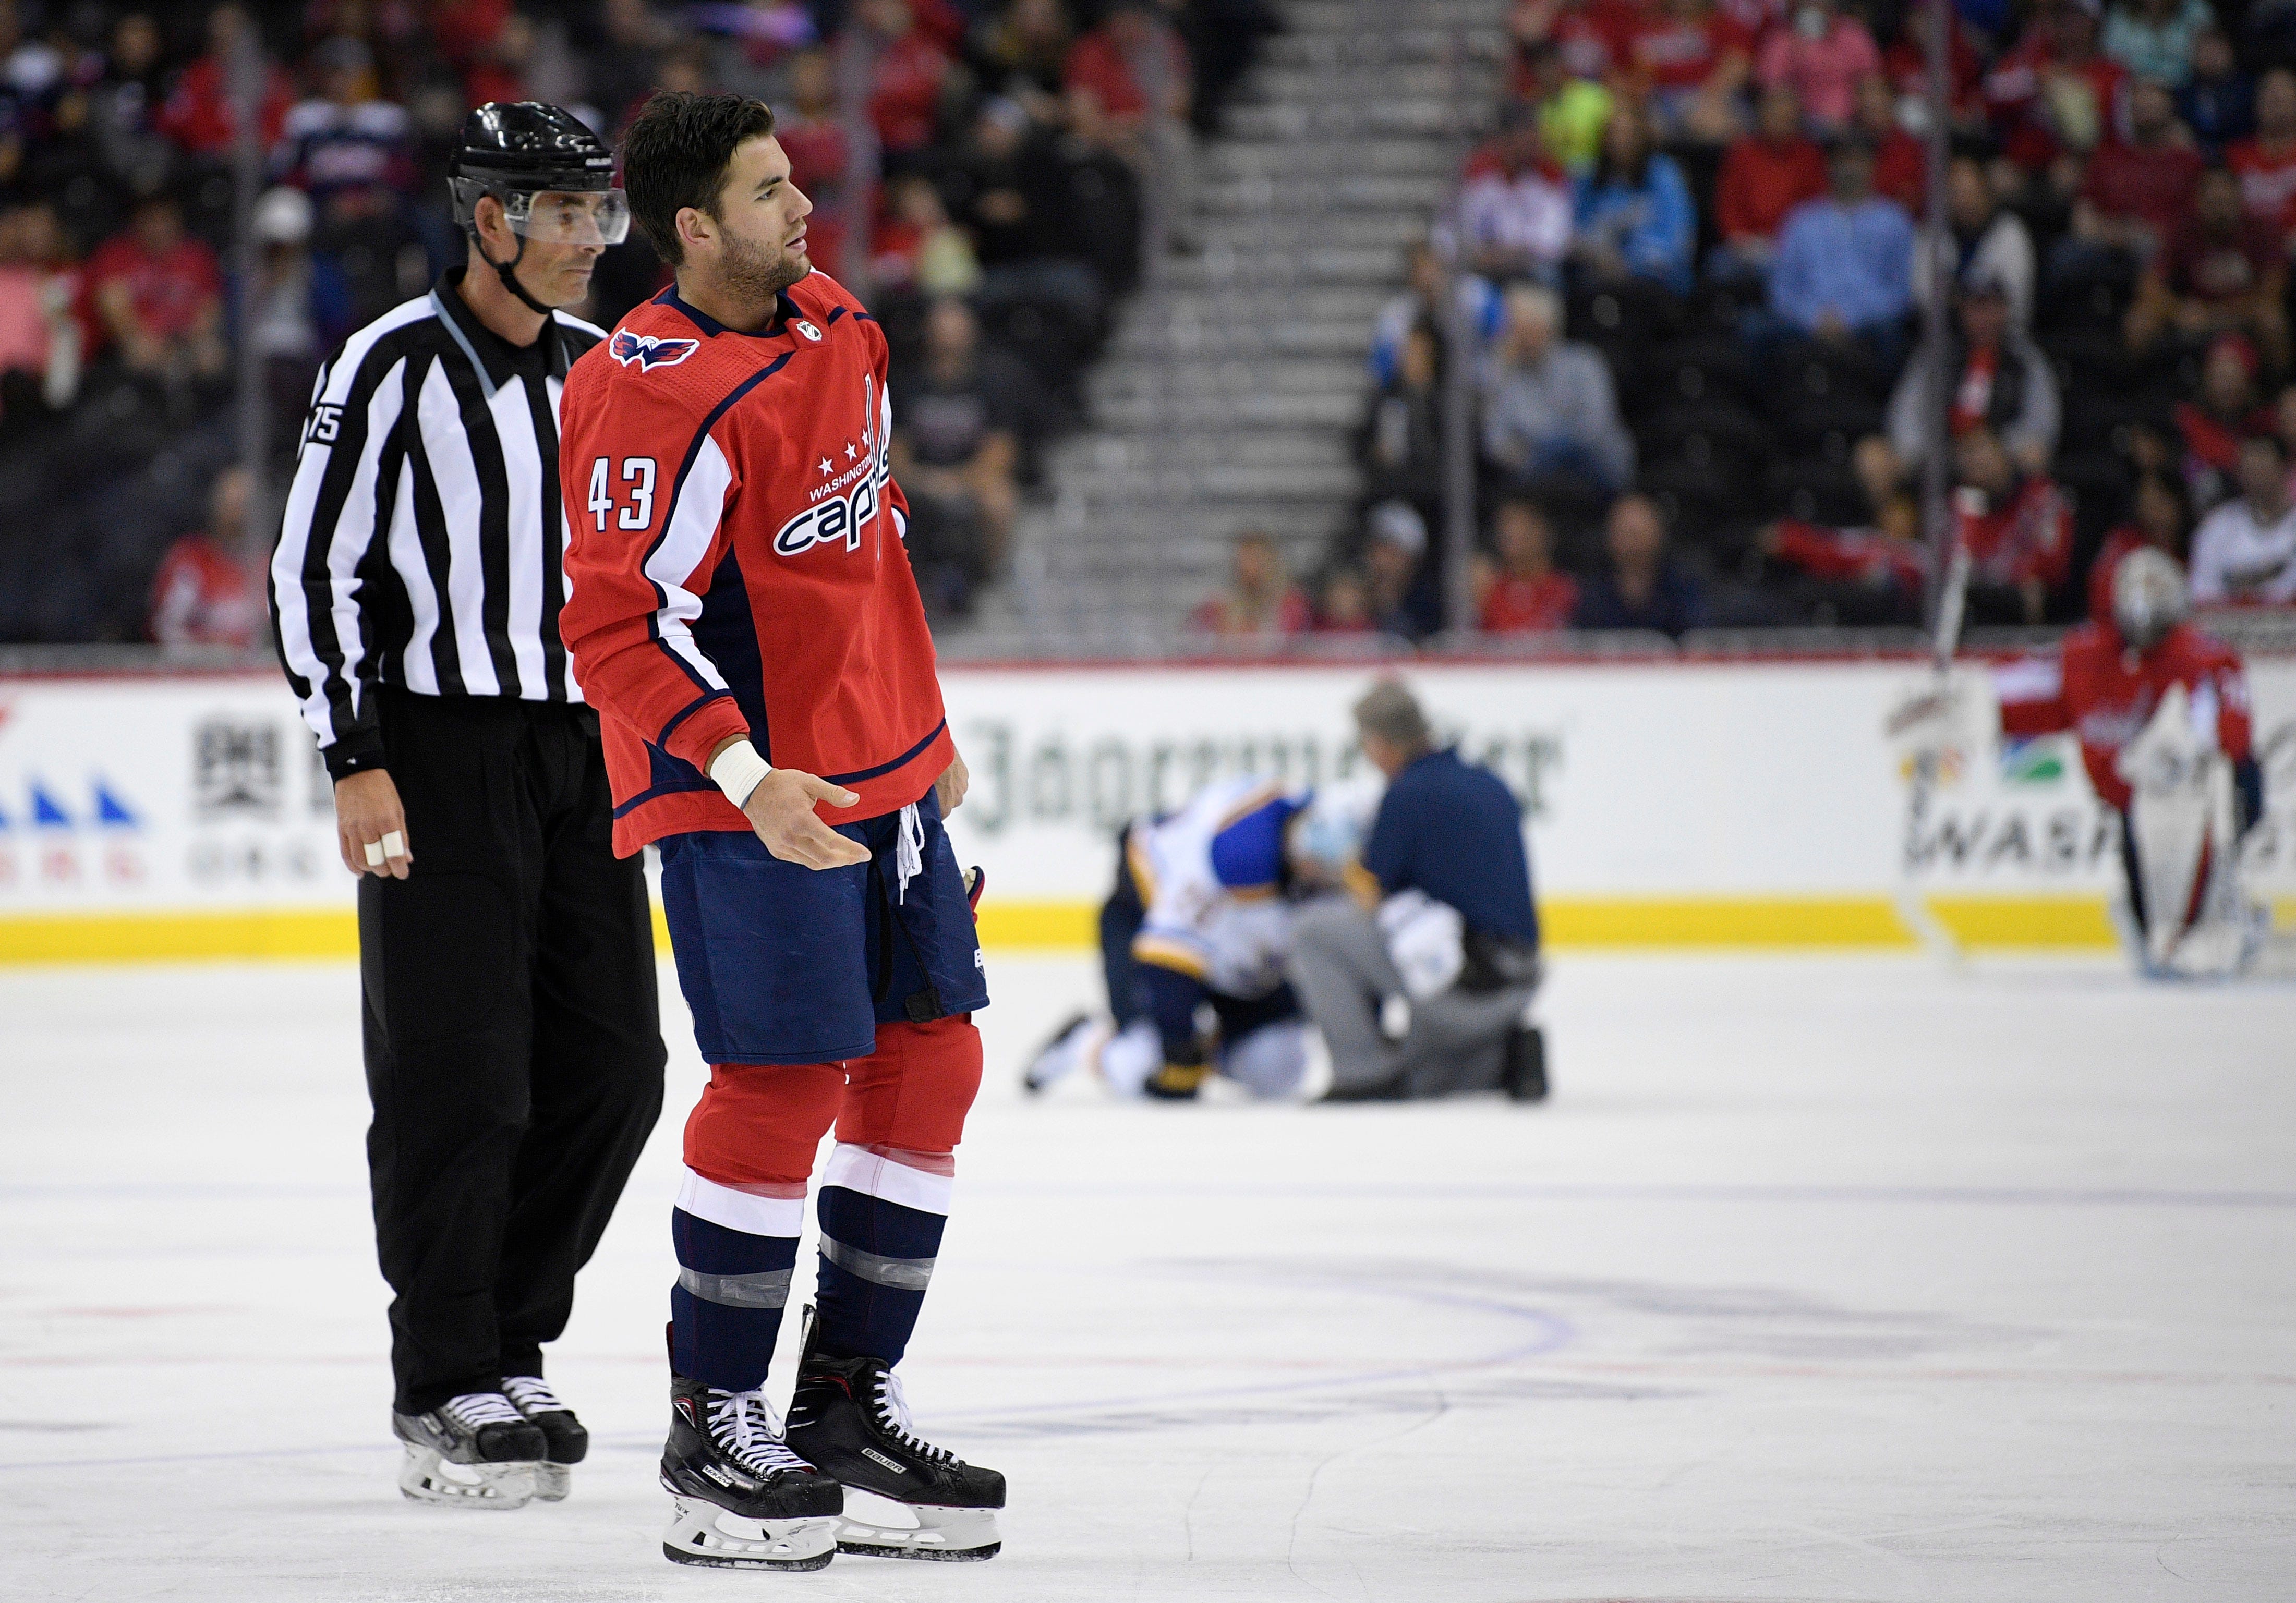 Capitals' Tom Wilson faces suspension after being ejected for hit on Blues' Oskar Sundqvist